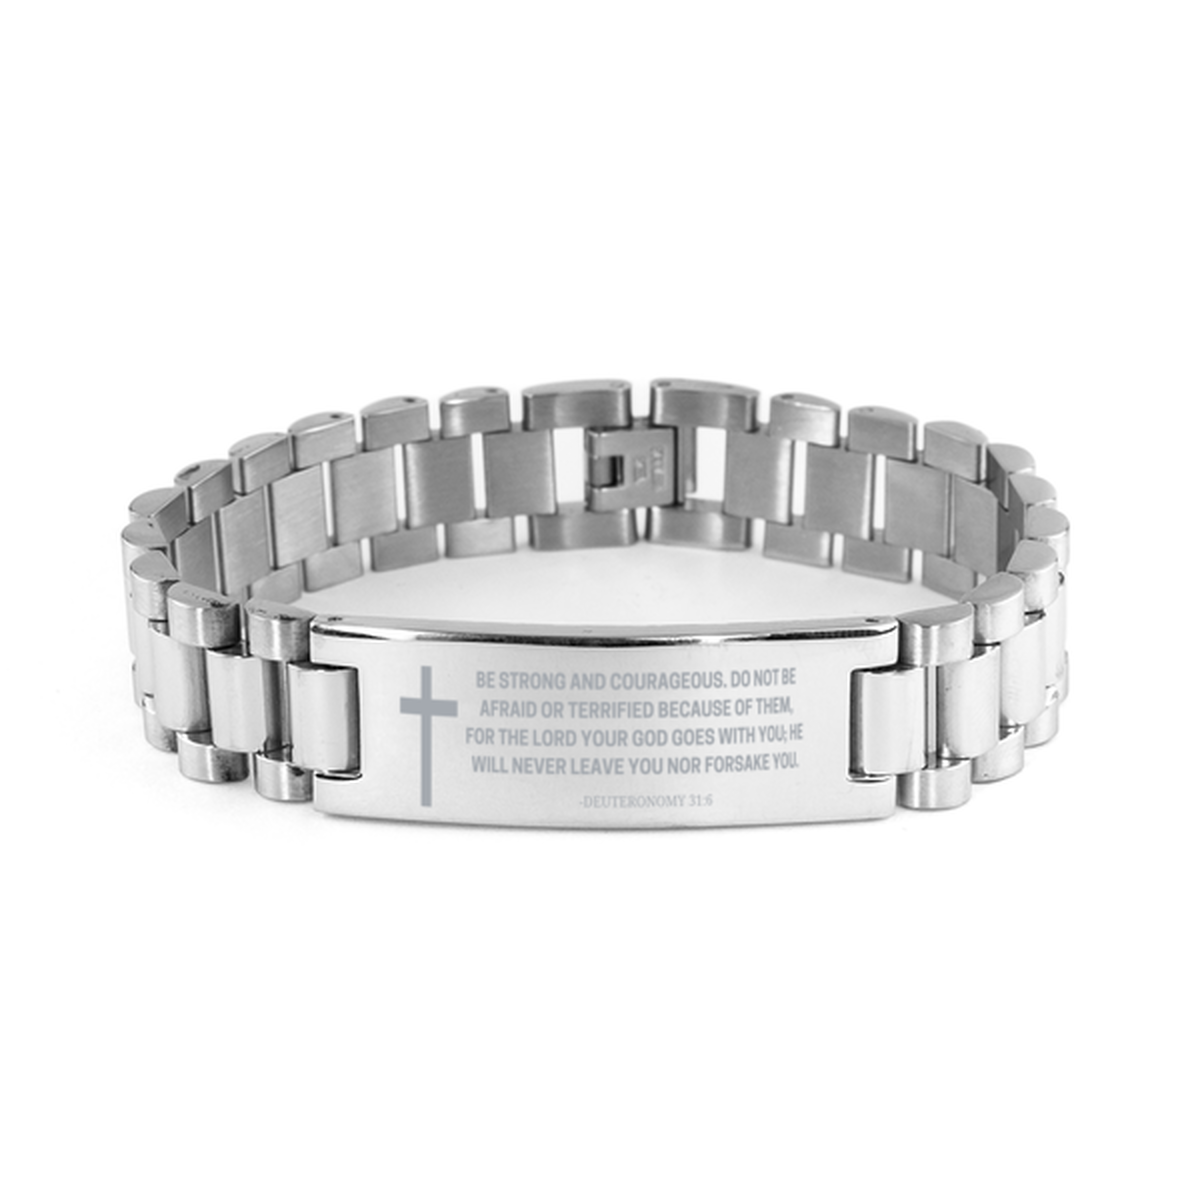 Baptism Gifts For Teenage Boys Girls, Christian Bible Verse Ladder Stainless Steel Bracelet, He will never leave you nor forsake you, Catholic Confirmation Gifts for Son, Godson, Grandson, Nephew